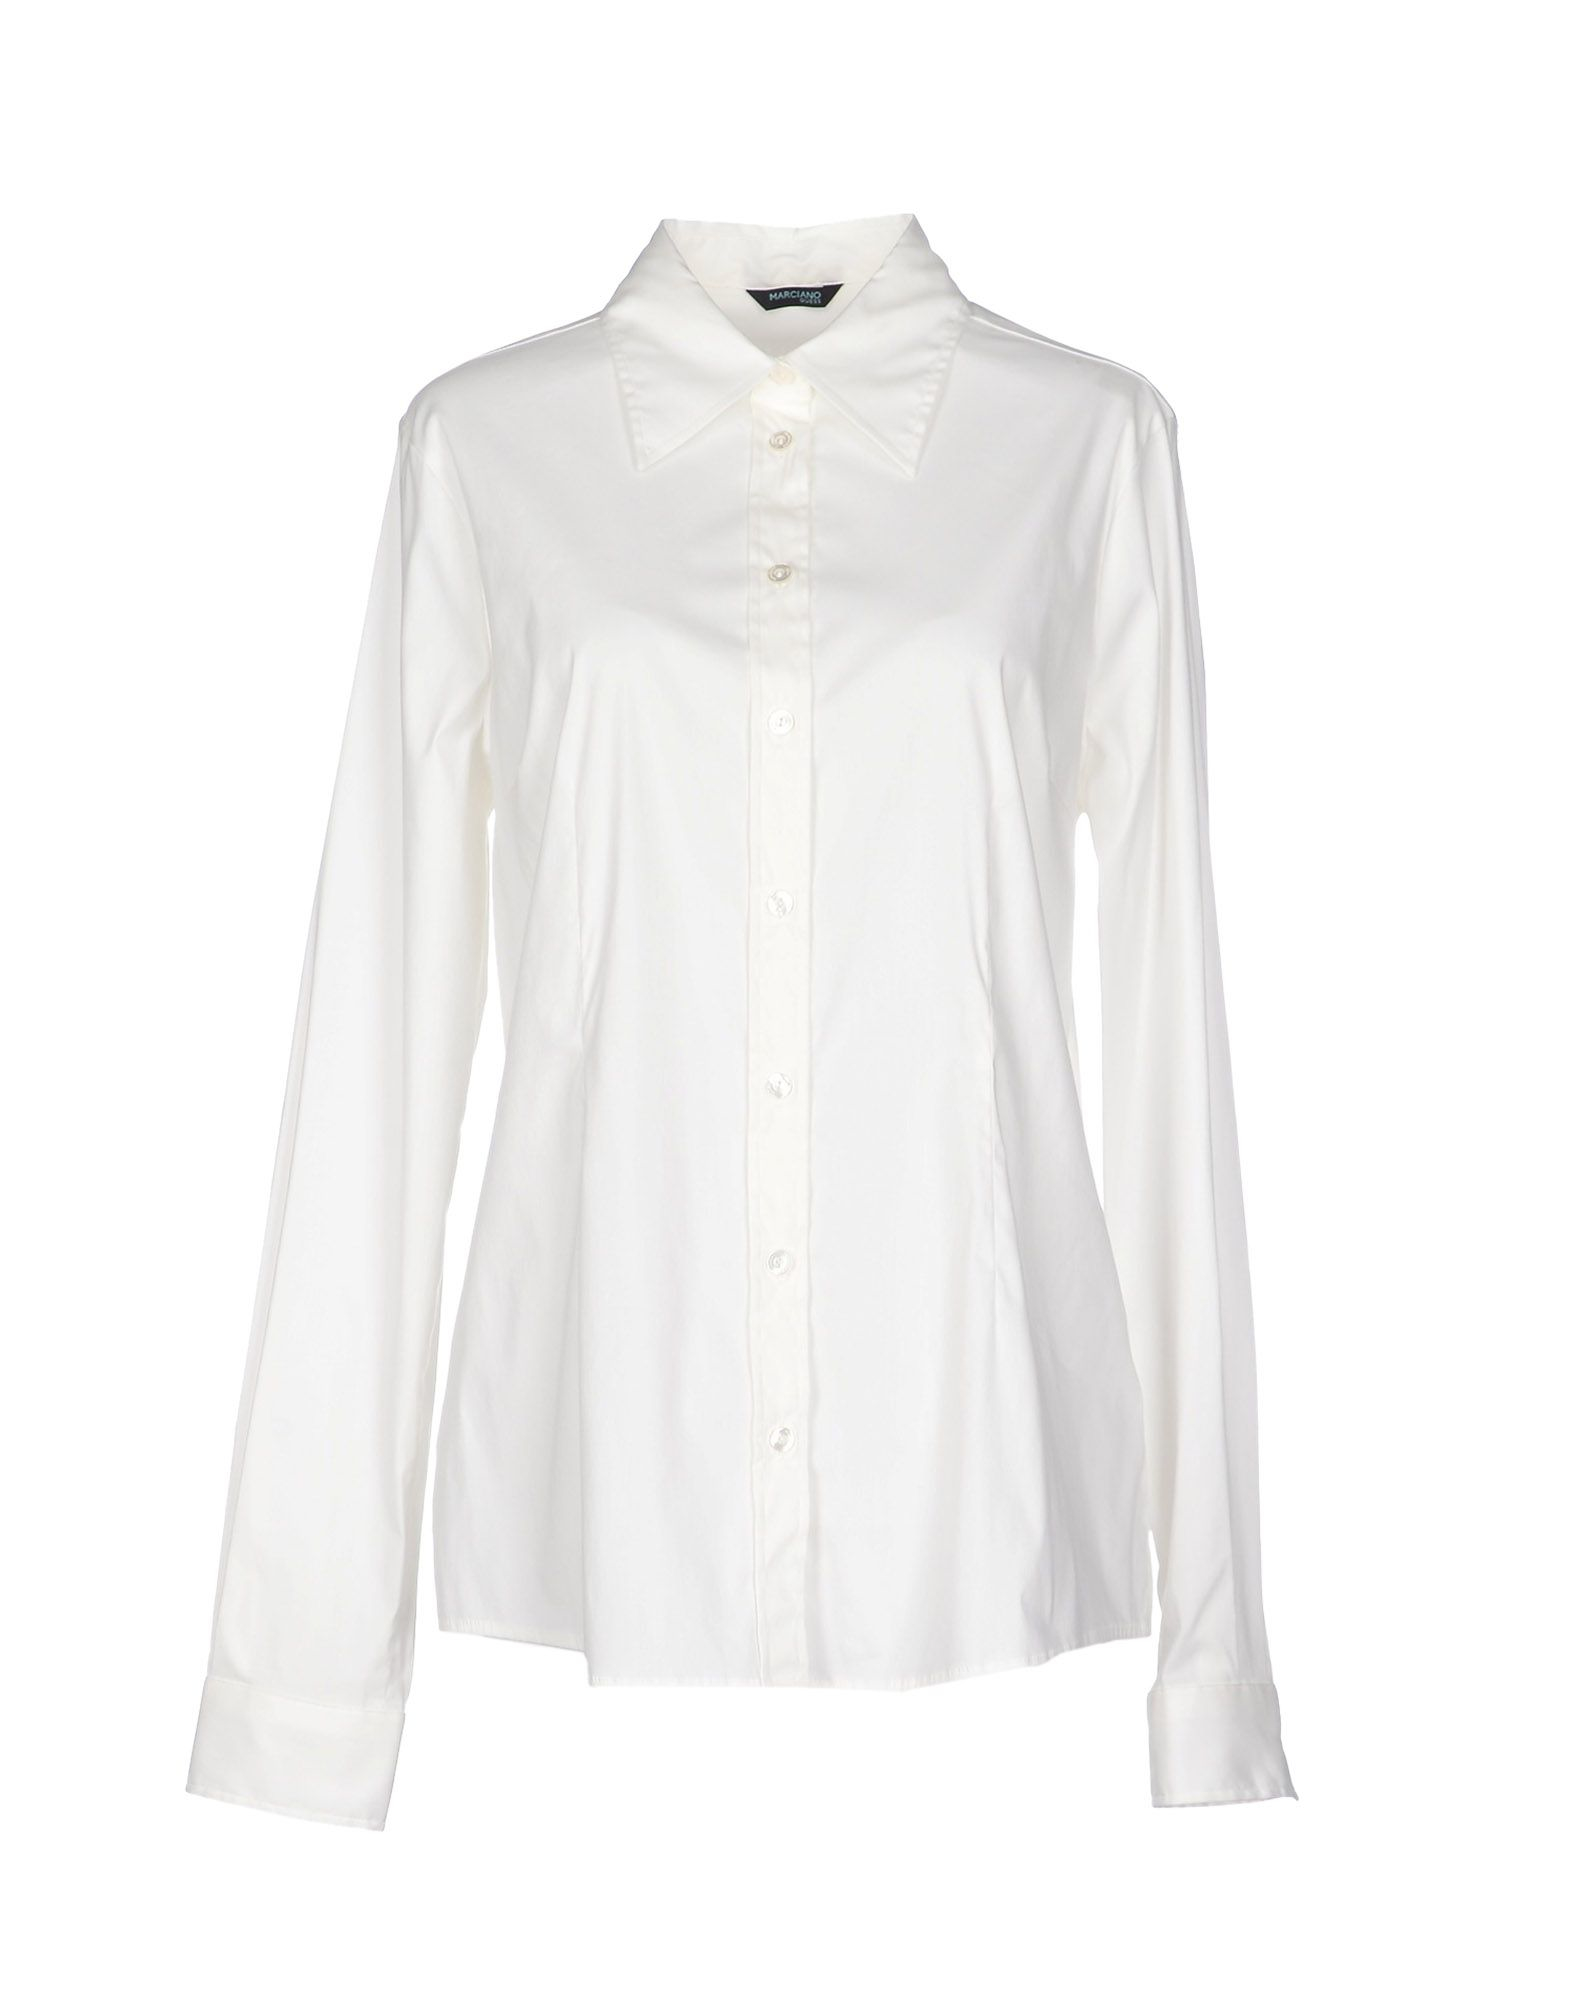 Lyst - Guess Shirt in White